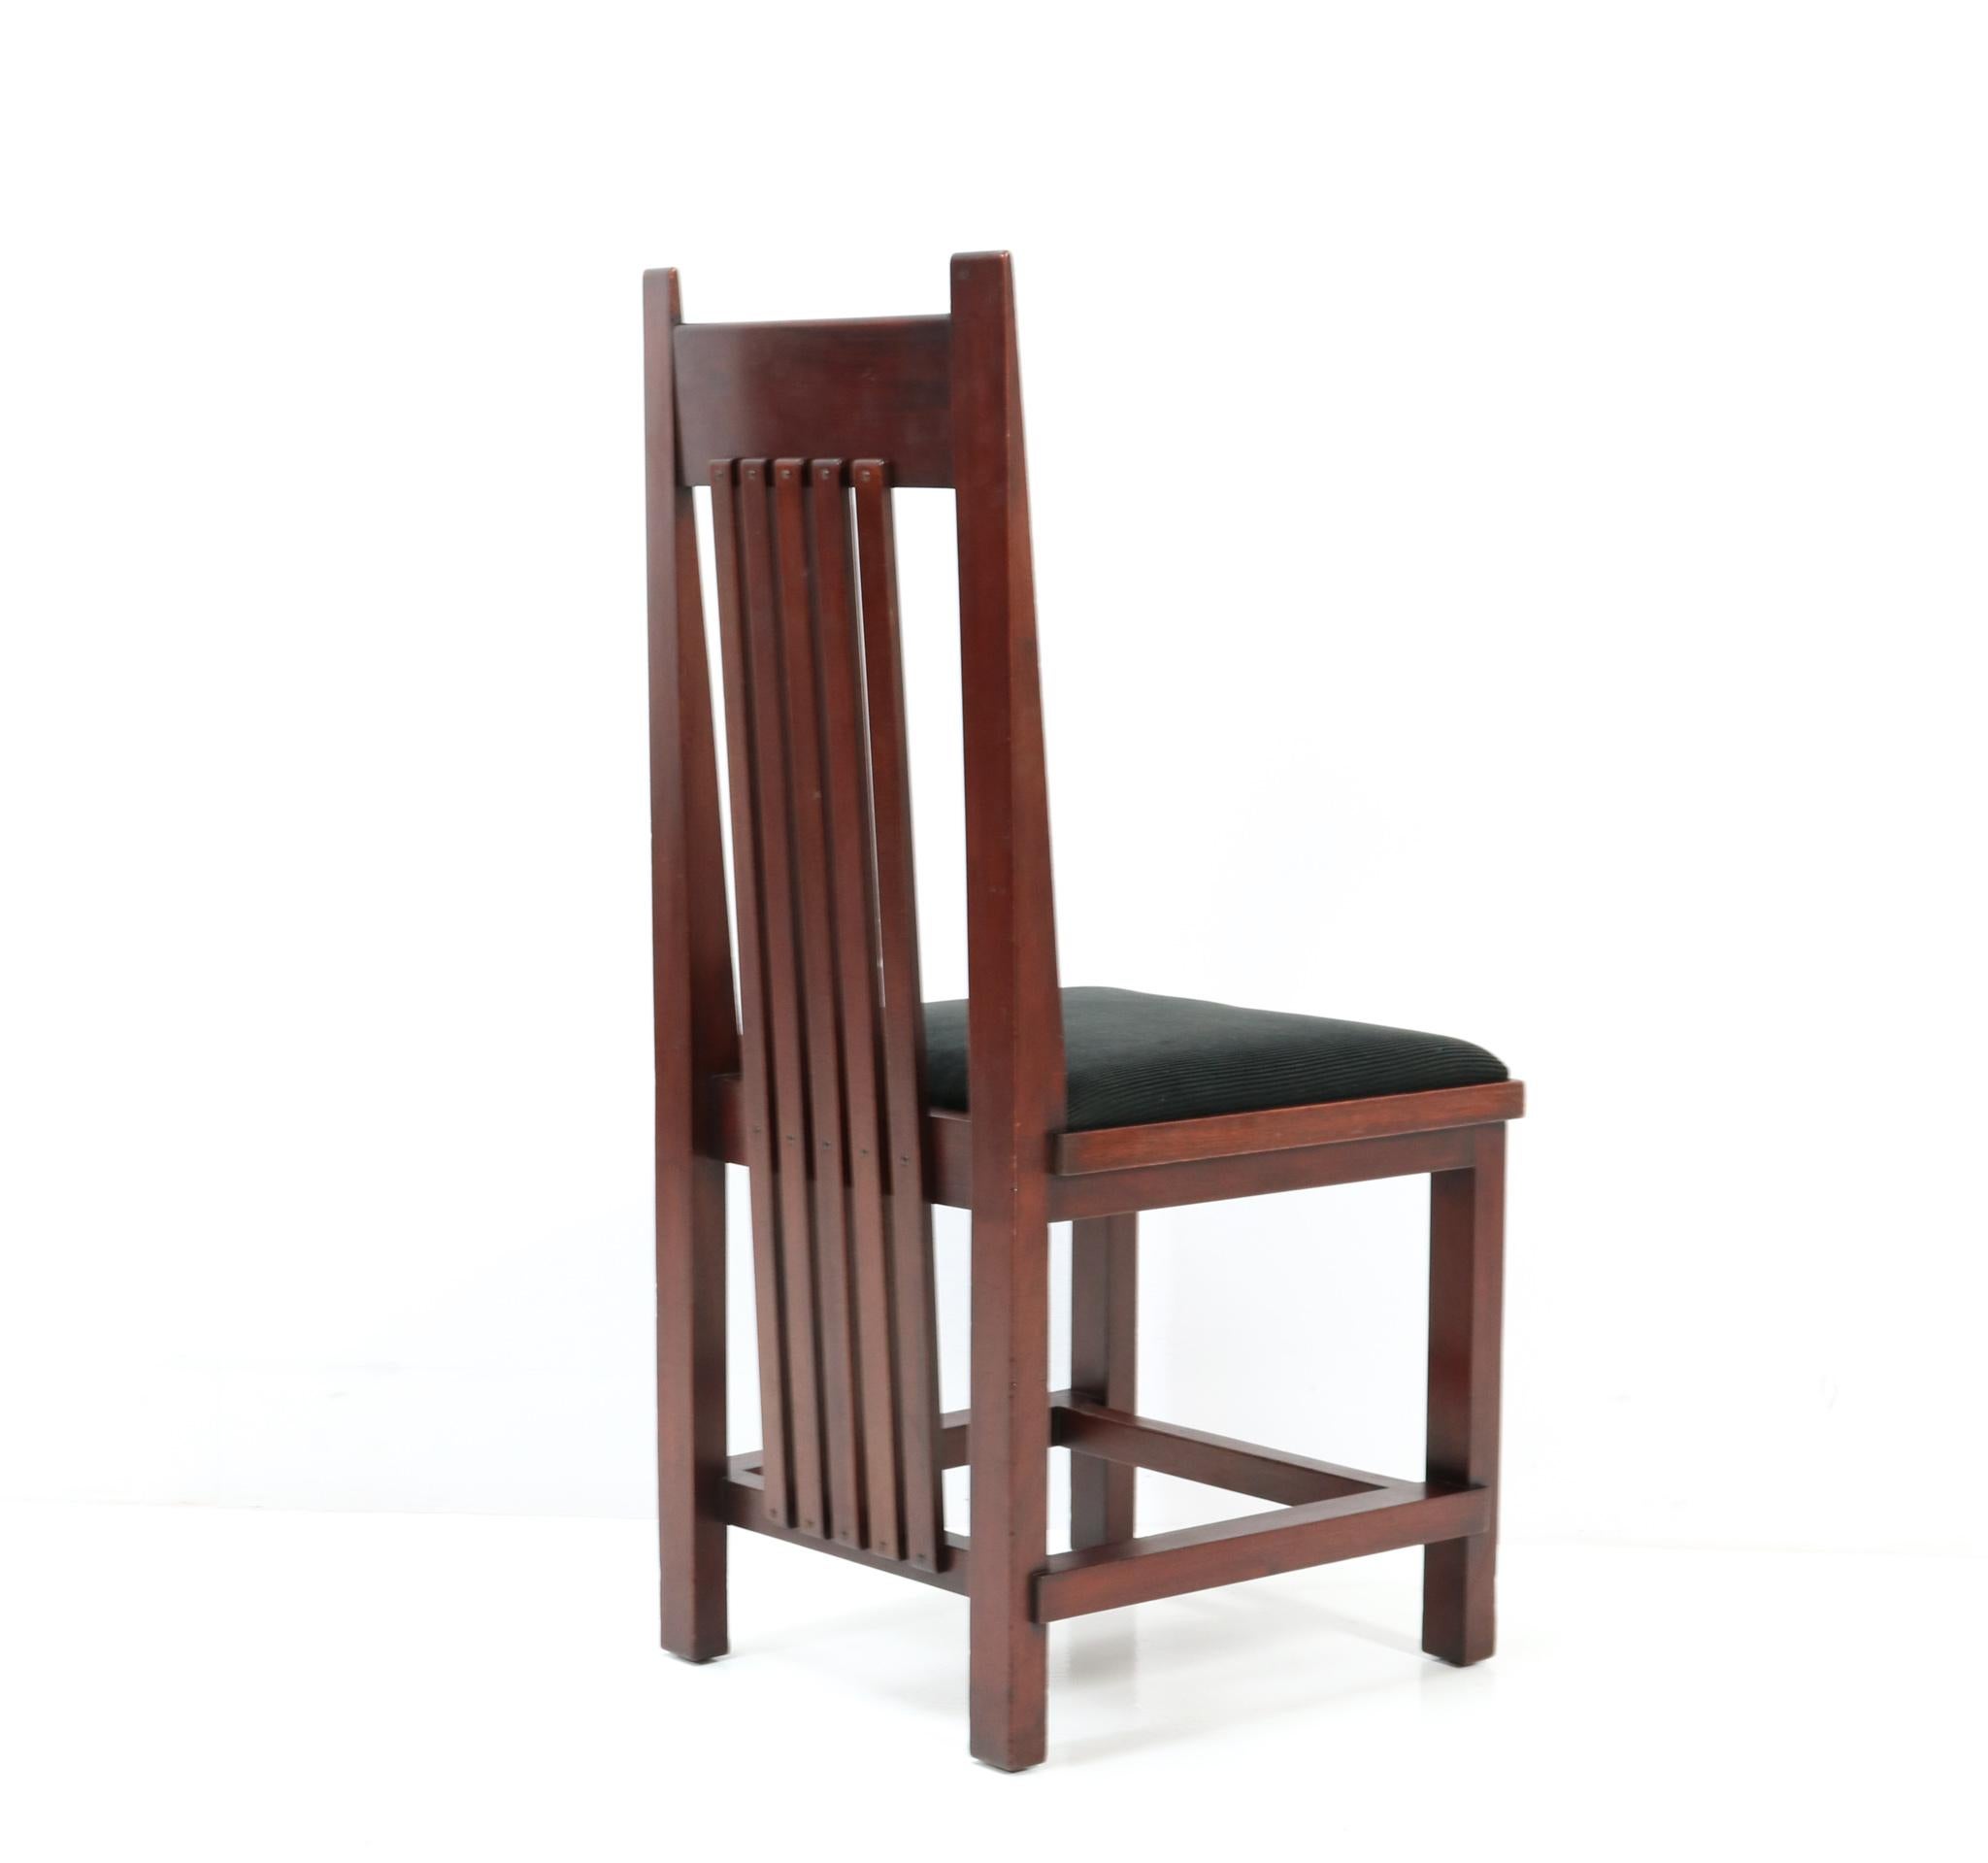 Early 20th Century Mahogany Art Deco Modernist High Back Chair by Hendrik Wouda for Pander, 1924 For Sale